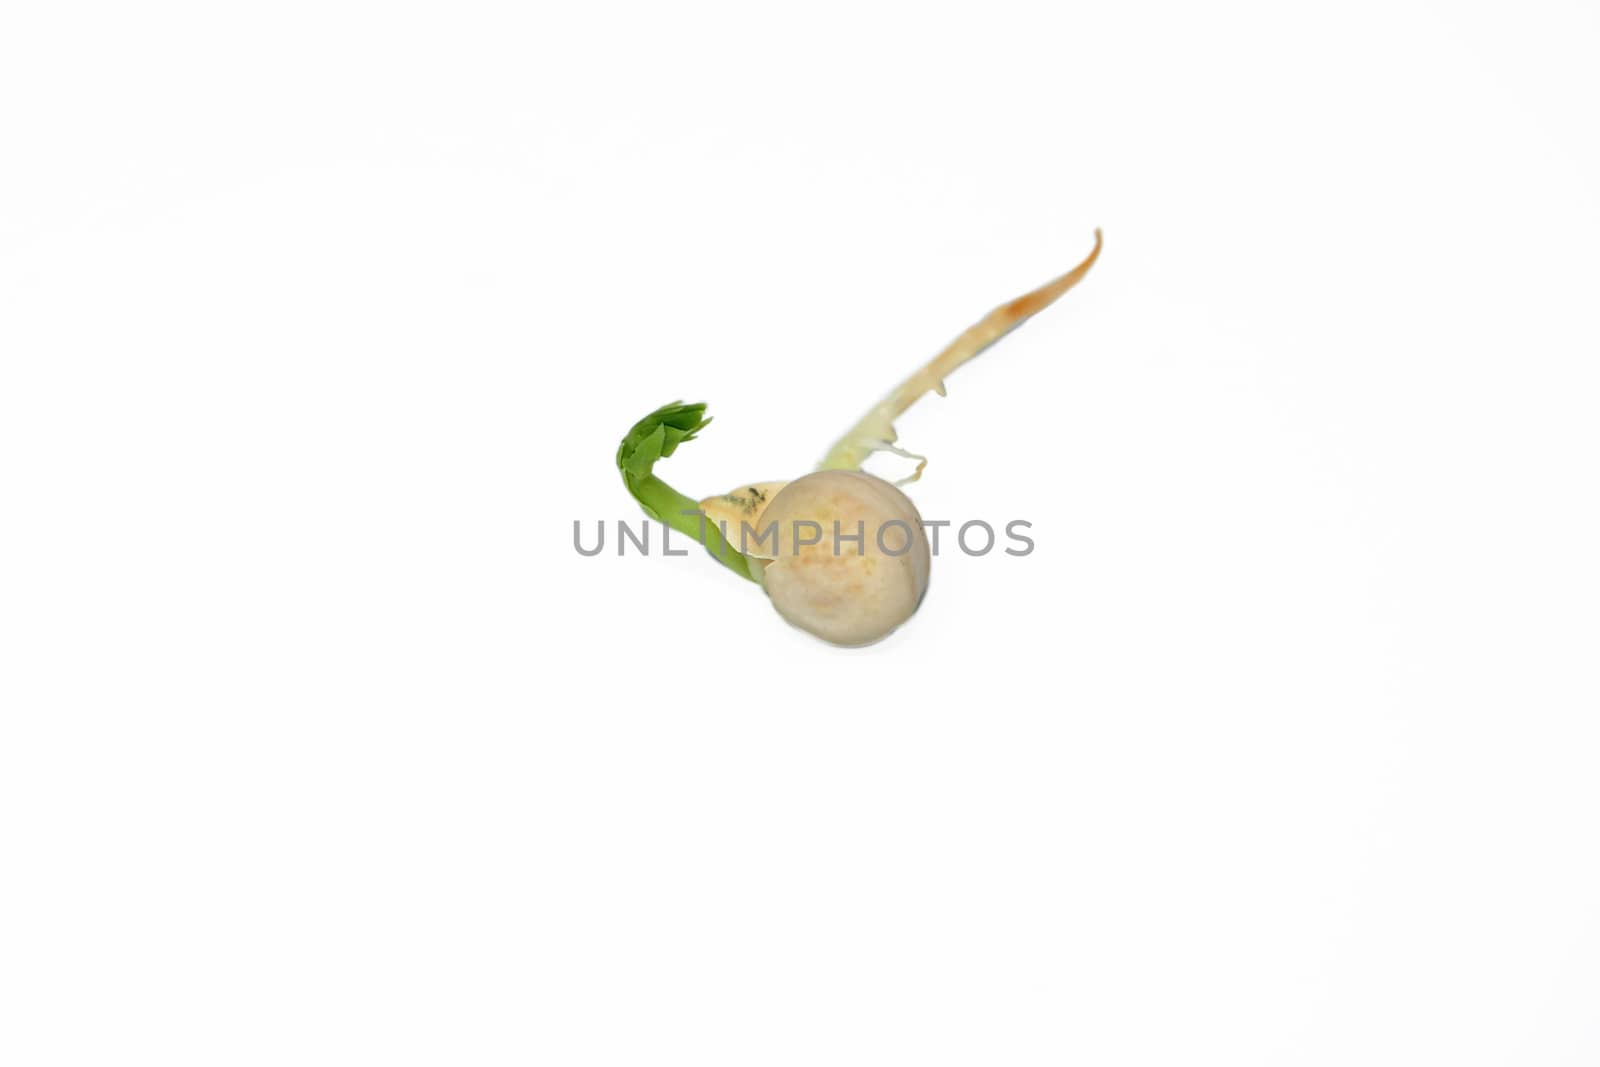 Single germinated pea seed sprouting, isolated on a white background